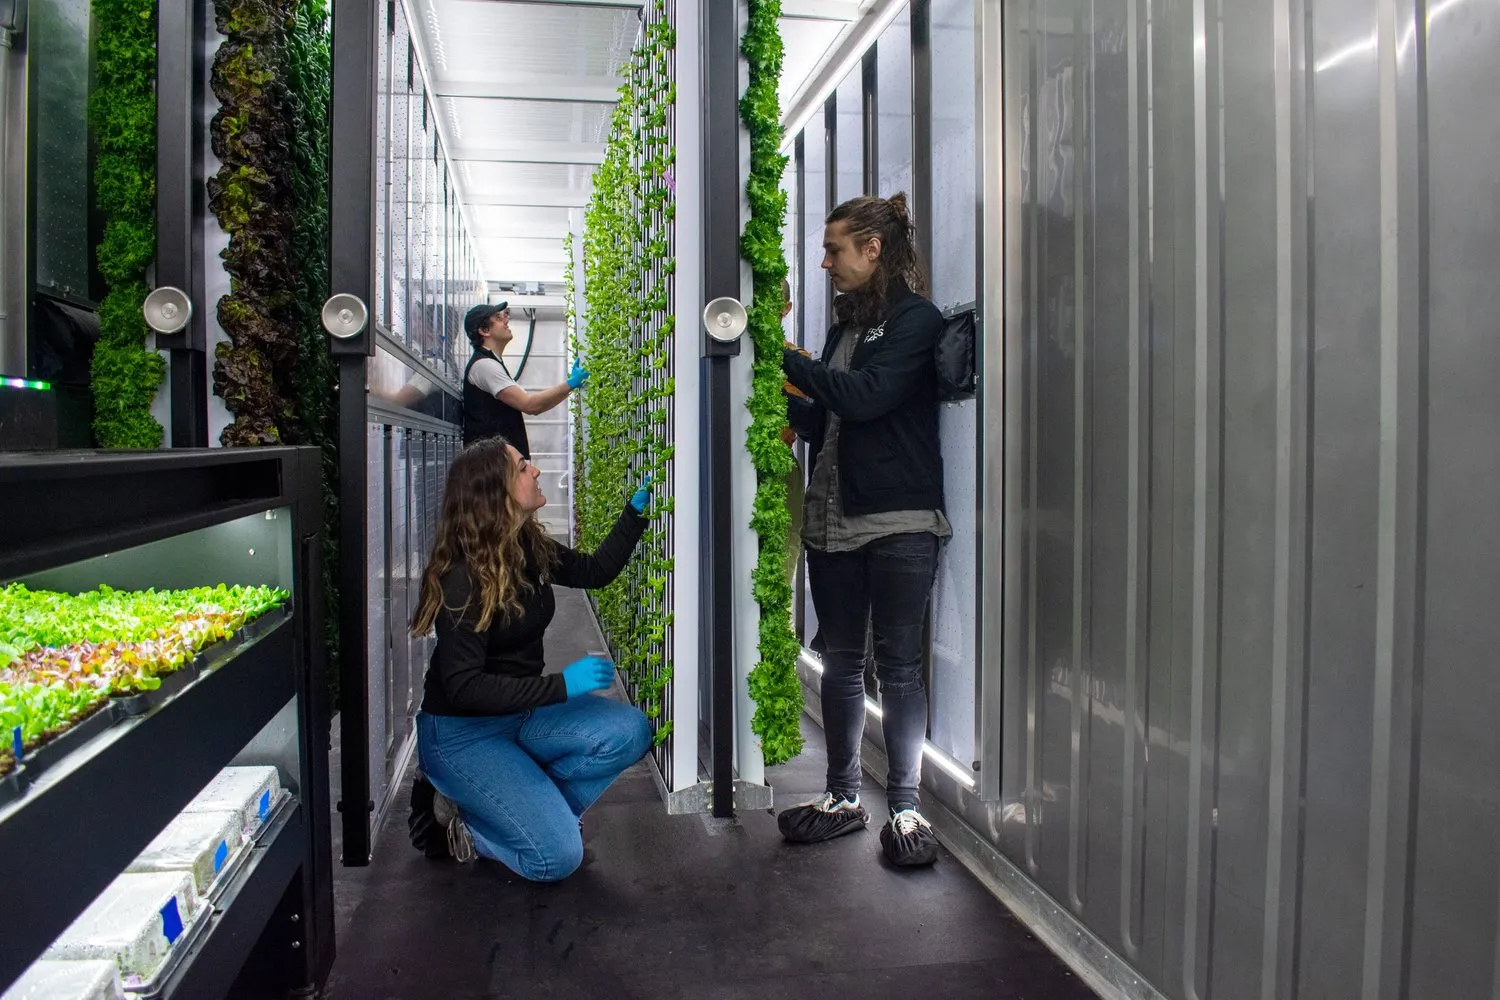 Three people stand inside a tight structure. They wear gloves and examine leafy greens growing out of the walls. The walls are layered.